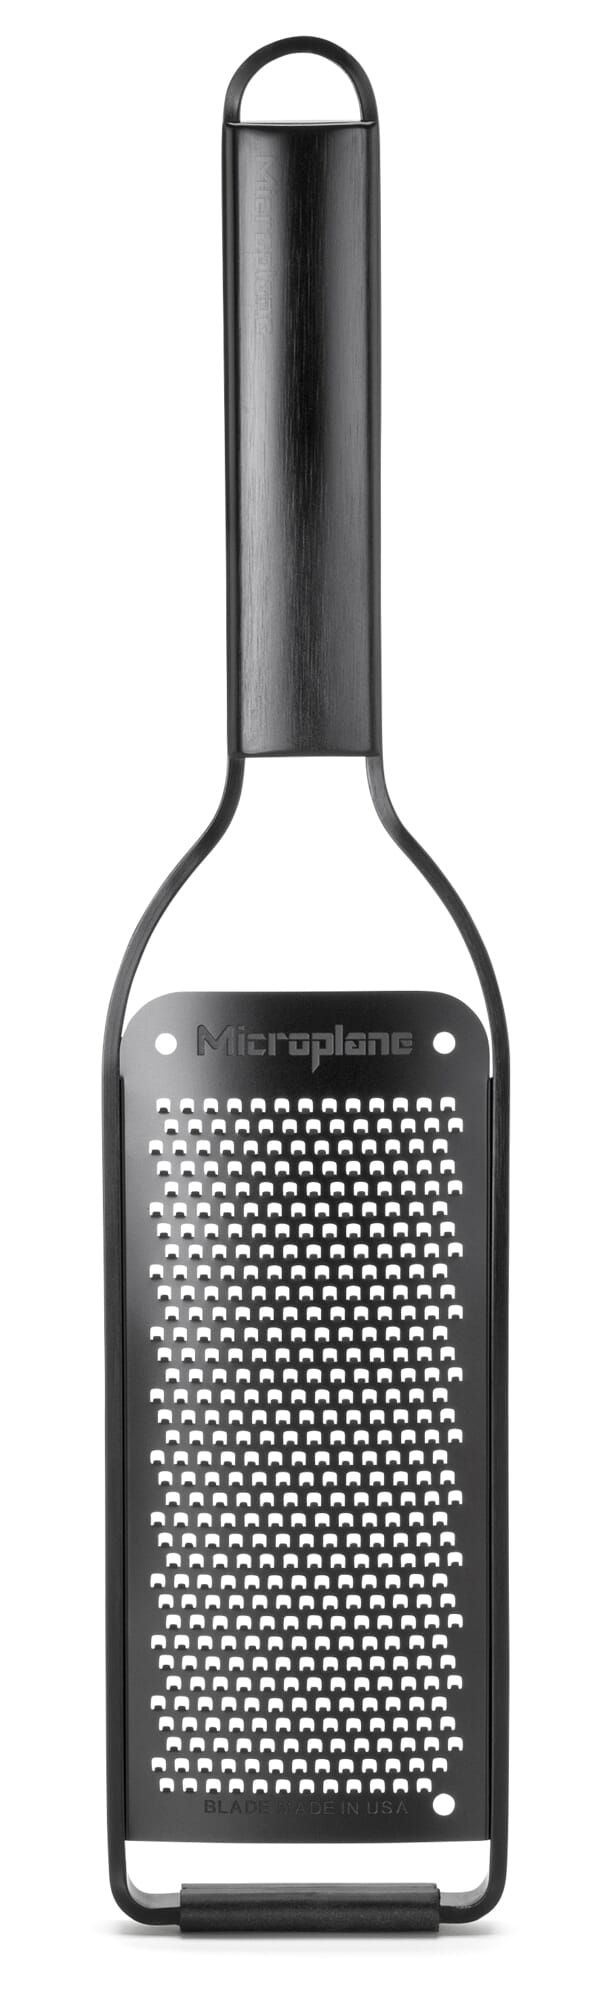 Buy Fine Grater Stainless Steel - online at RÖSLE GmbH & Co. KG